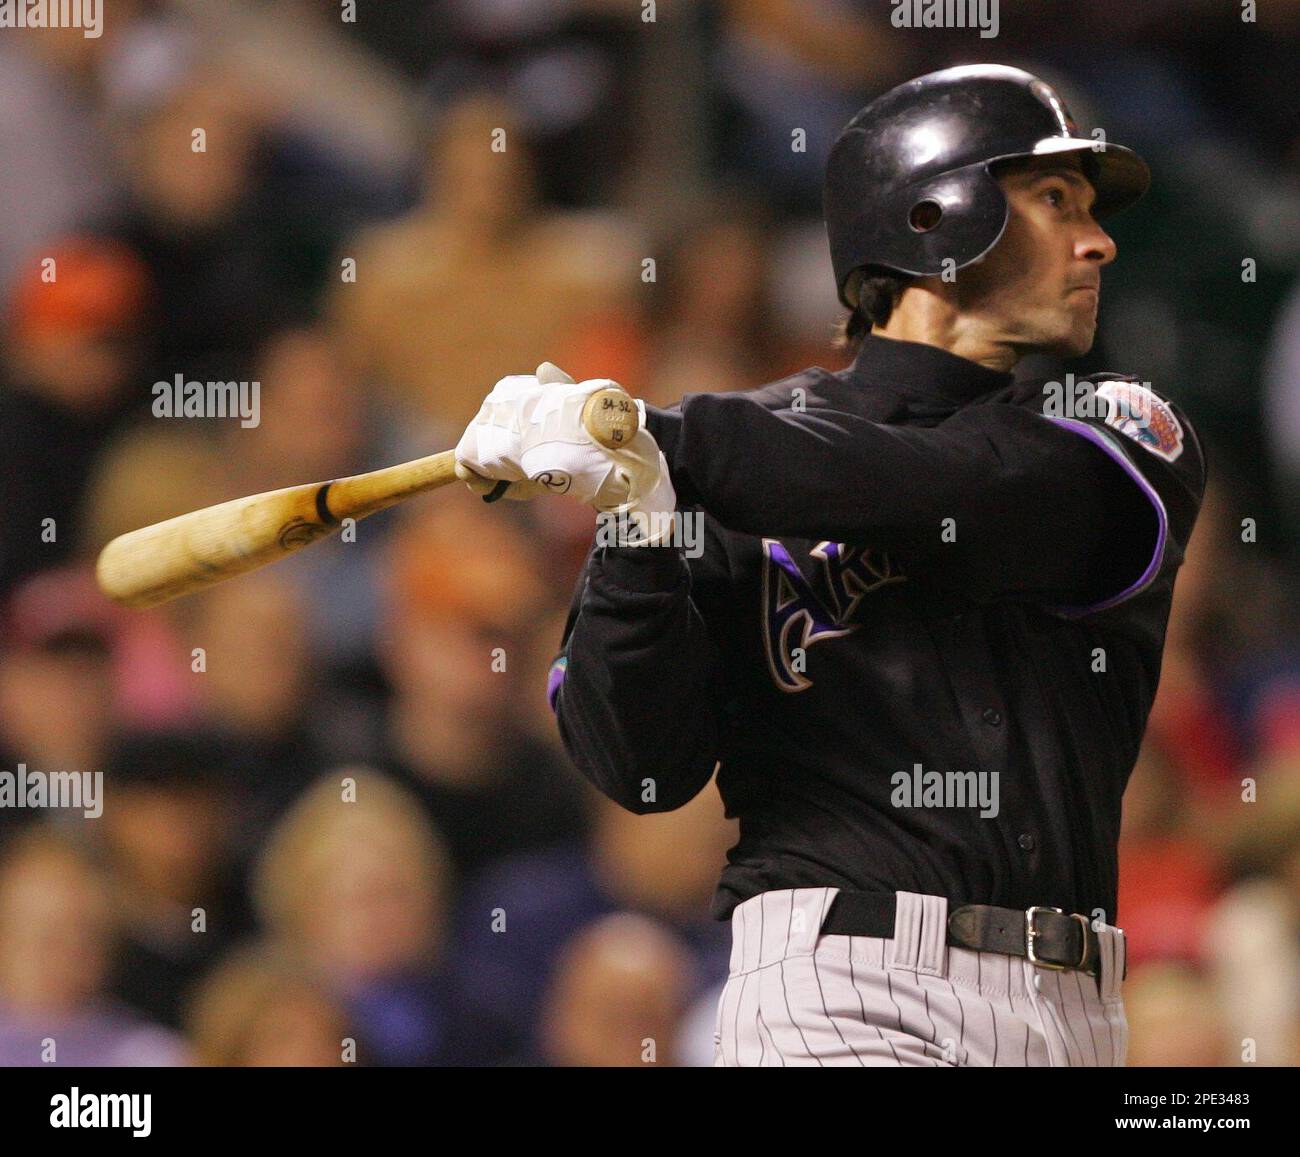 Arizona Diamondbacks' Shawn Green hits a game-tying RBI double off San Francisco Giants starting pitcher Brett Tomko during the sixth inning in San Francisco, Tuesday June 21, 2005. Arizona won the game, 6-4, to snap a five-game losing streak. (AP Photo/Eric Risberg) Banque D'Images